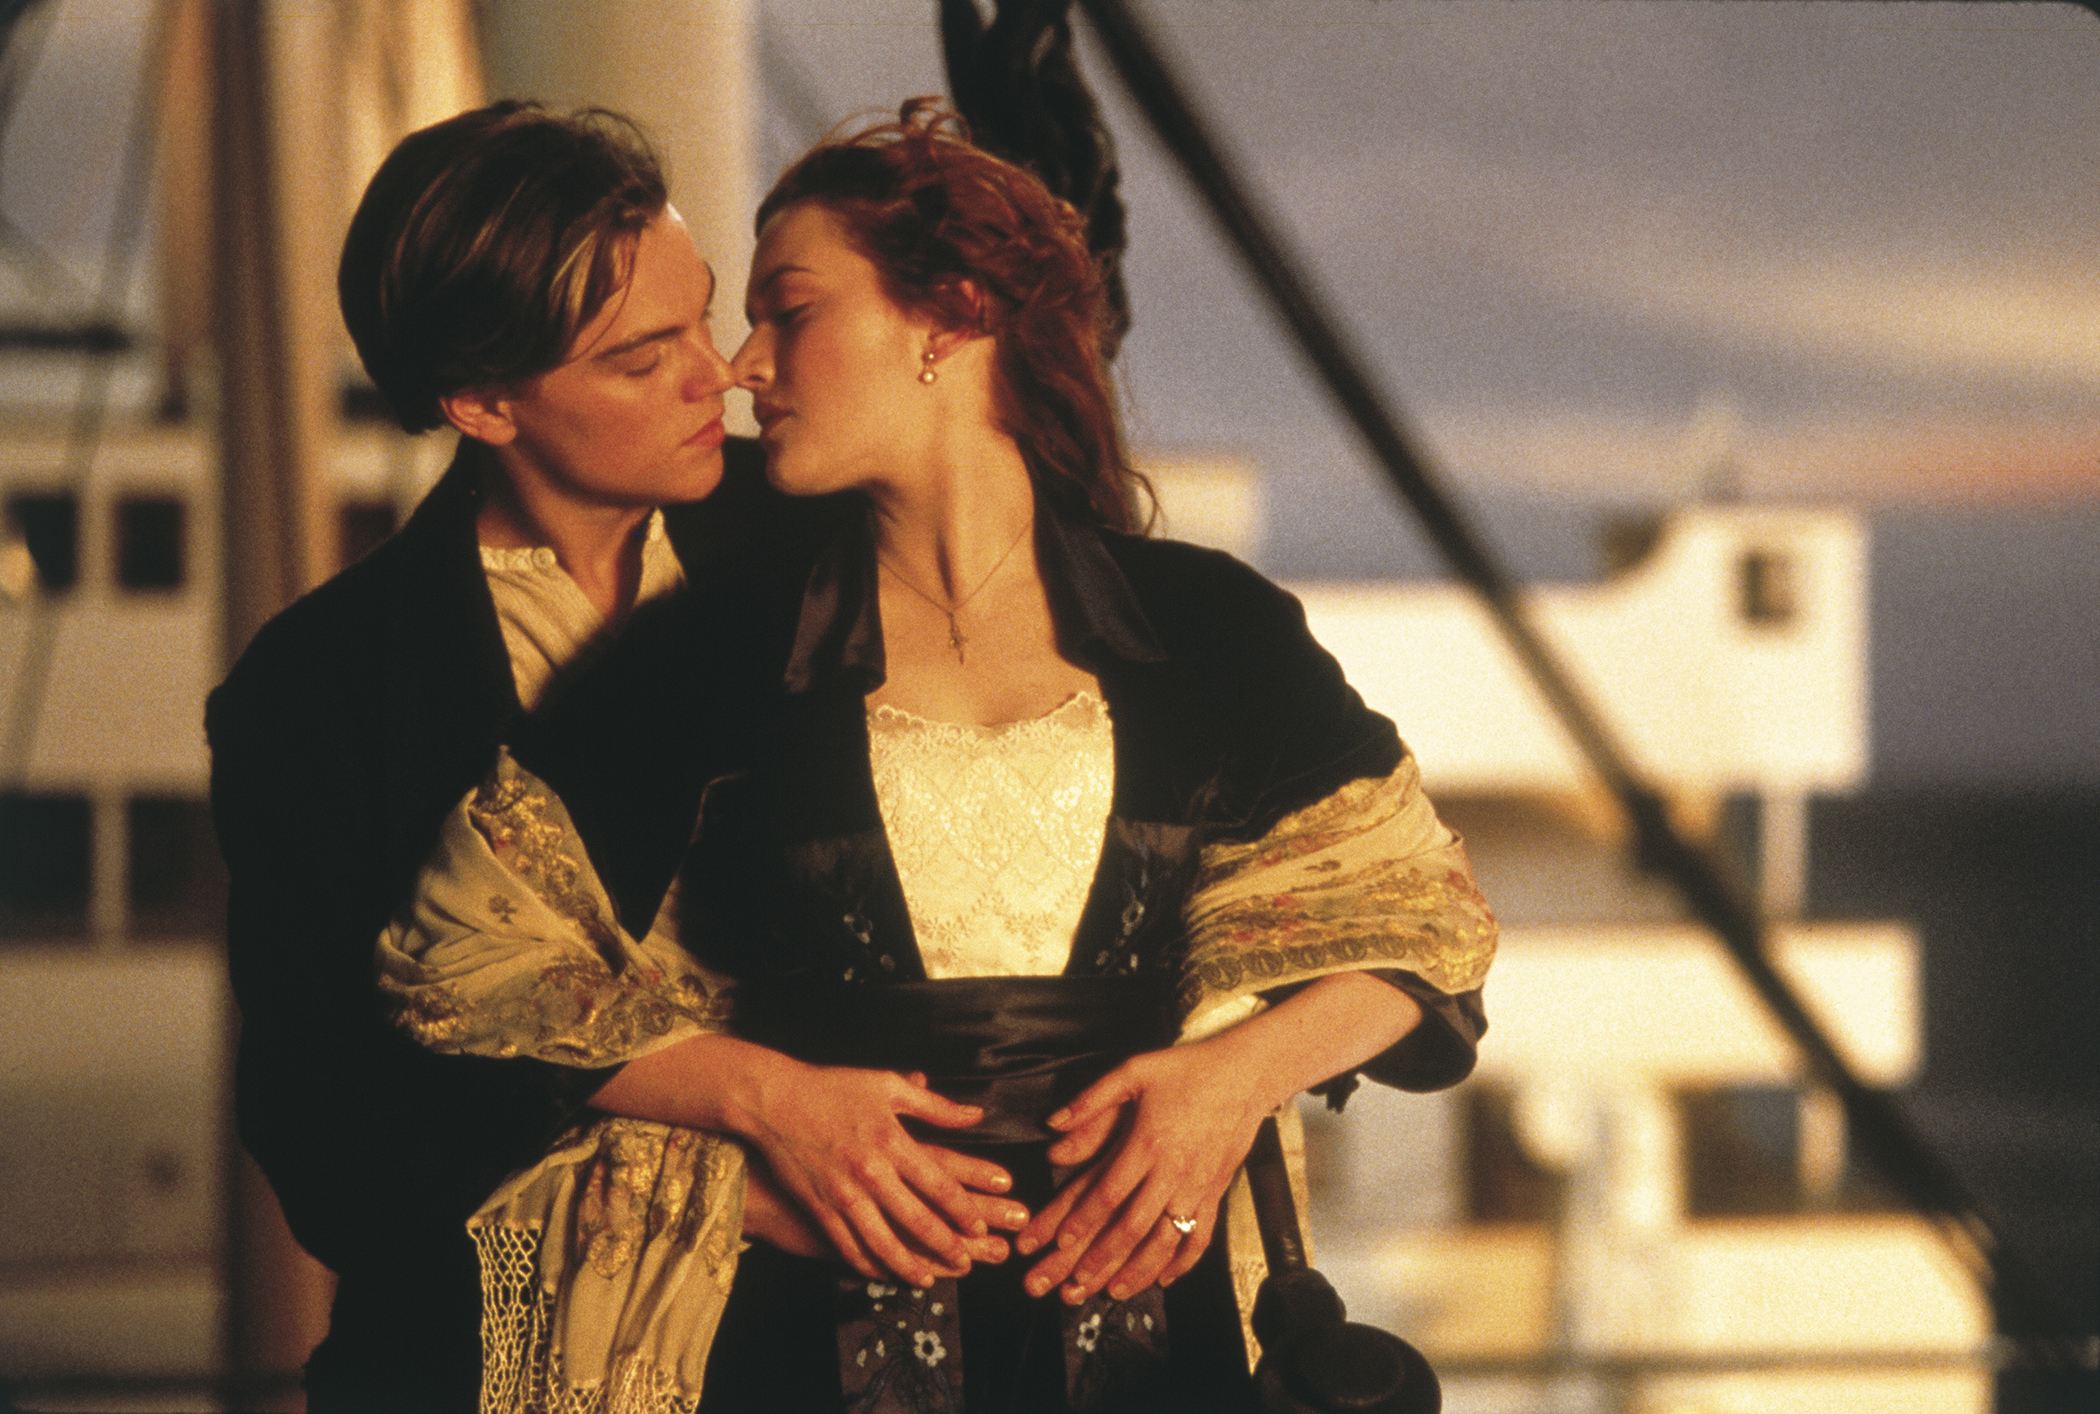 Left to right: Leonardo DiCaprio plays Jack Dawson and Kate Winslet plays Rose DeWitt in TITANIC, from Paramount Pictures and Twentieth Century Fox.